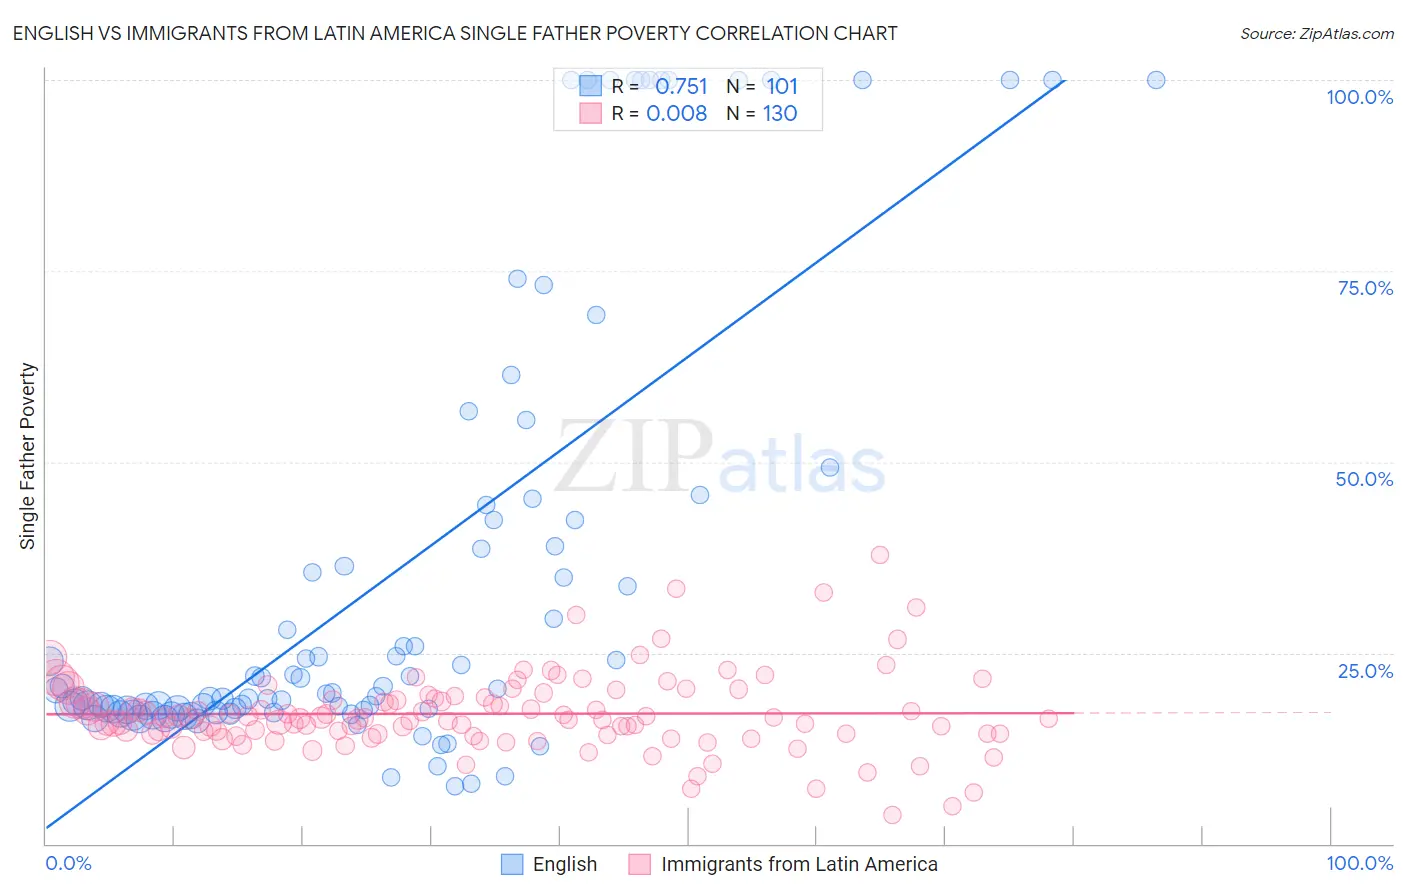 English vs Immigrants from Latin America Single Father Poverty